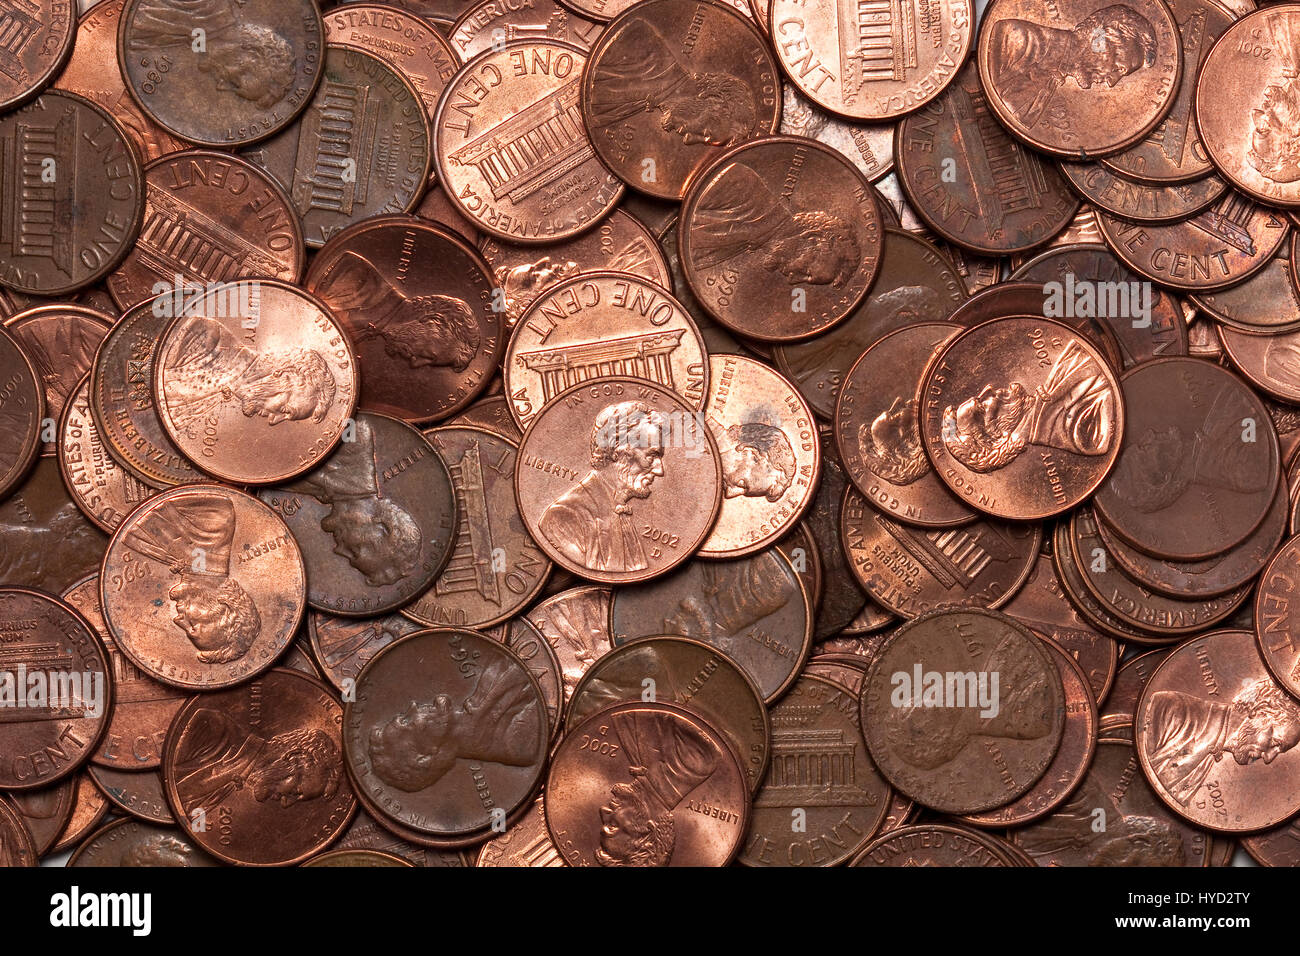 Pennies - A large number of coins Stock Photo